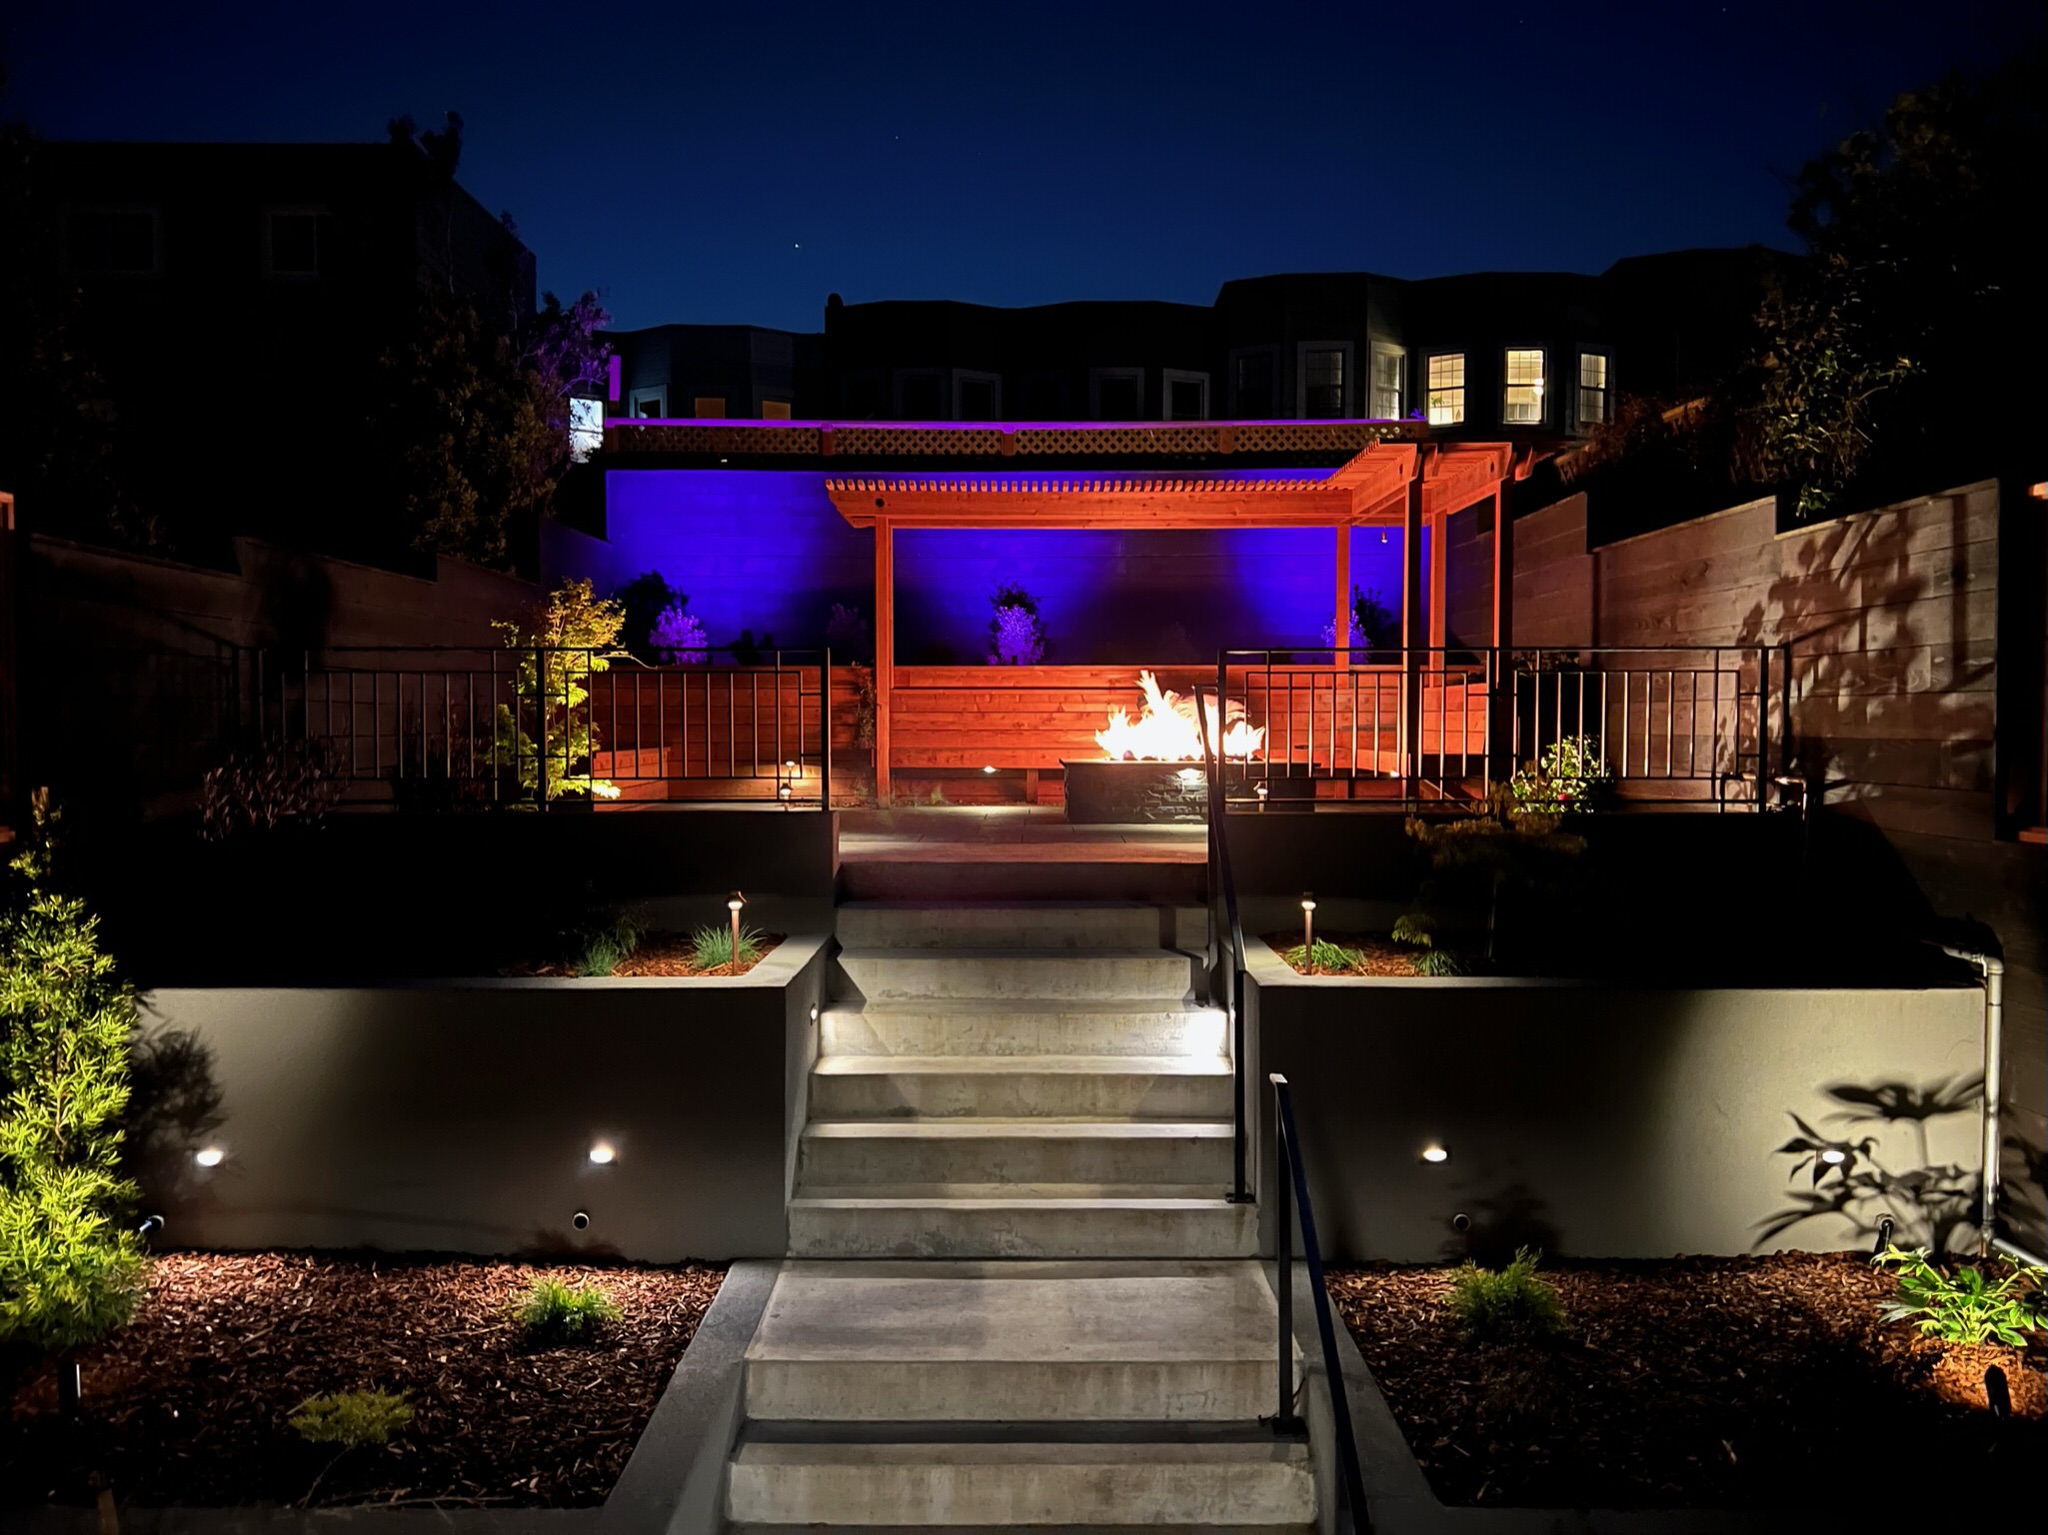 Backyard at night with FX Luminaire Luxor lighting system. Purple background color behind pergola. Fire pit lit with flames visible in front of redwood bench and pergola.